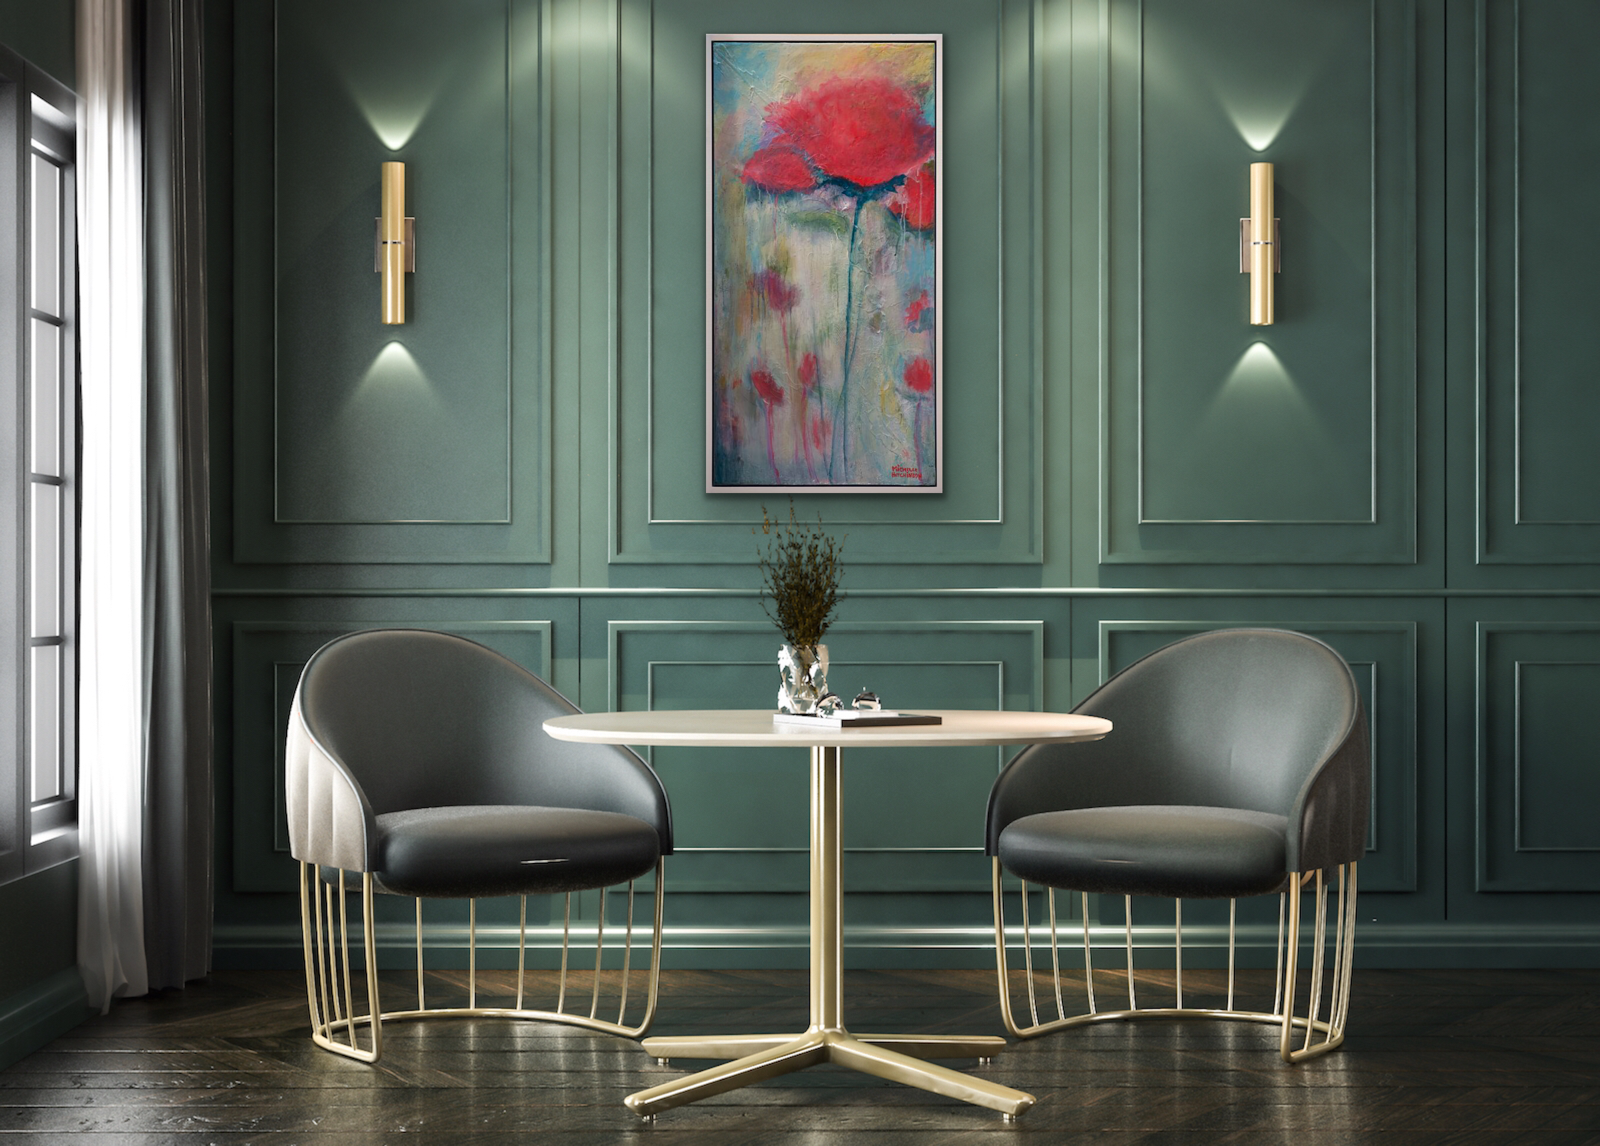 Quiet and tonal, this soft focus original painting speaks of serenity with its muted red and soft blue greens displayed on a muted green wall in a sophisticated breakfast area.